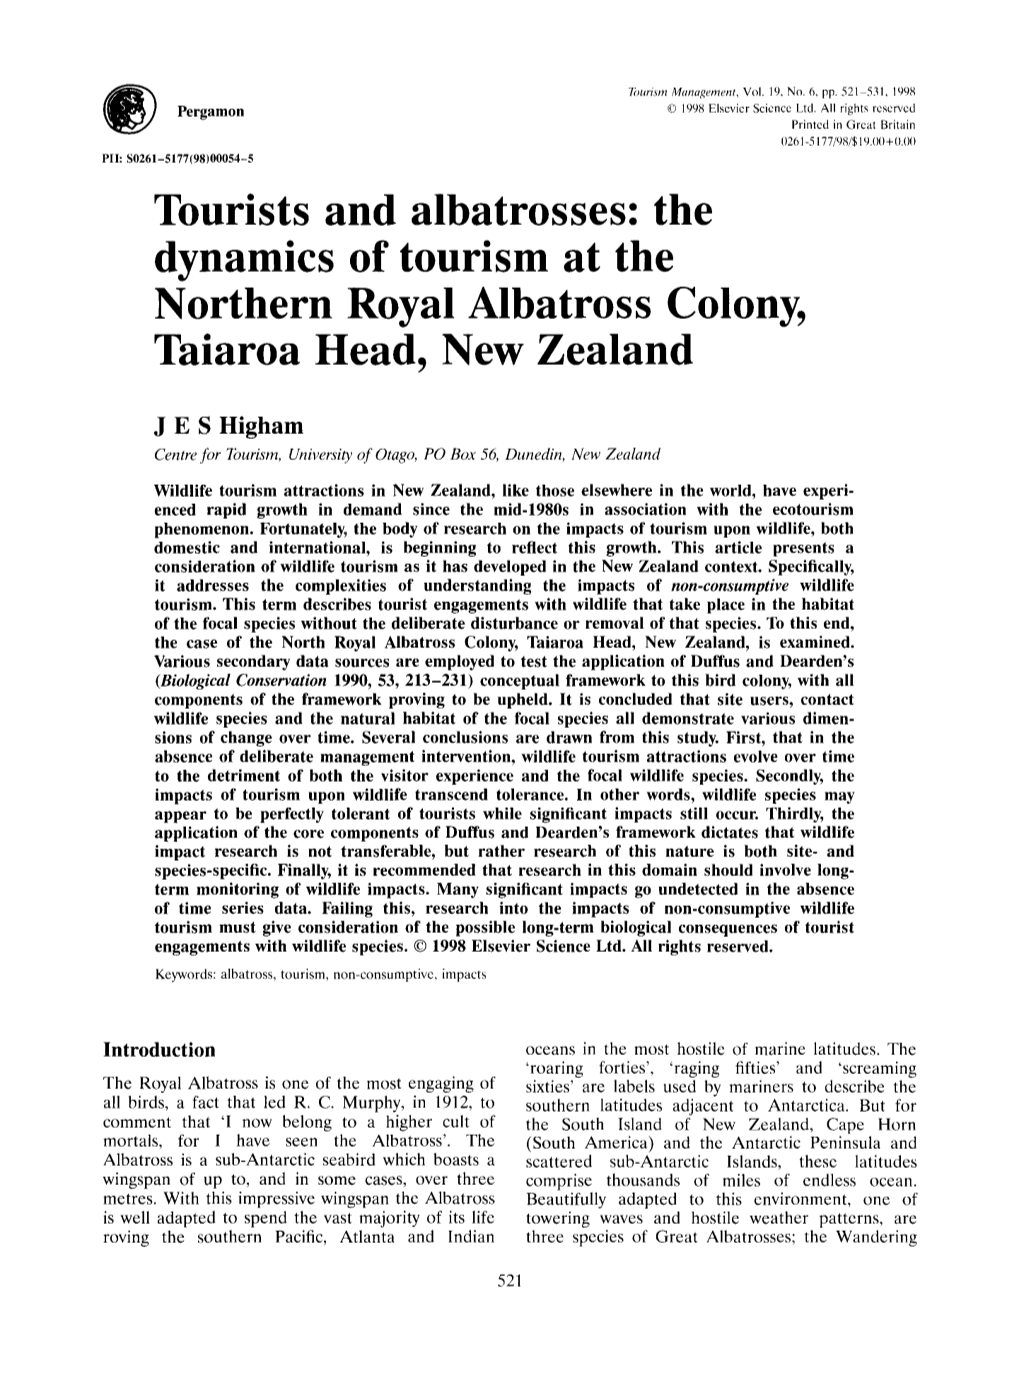 Tourists and Albatrosses: the Dynamics of Tourism at the Northern Royal Albatross Colony, Taiaroa Head, New Zealand